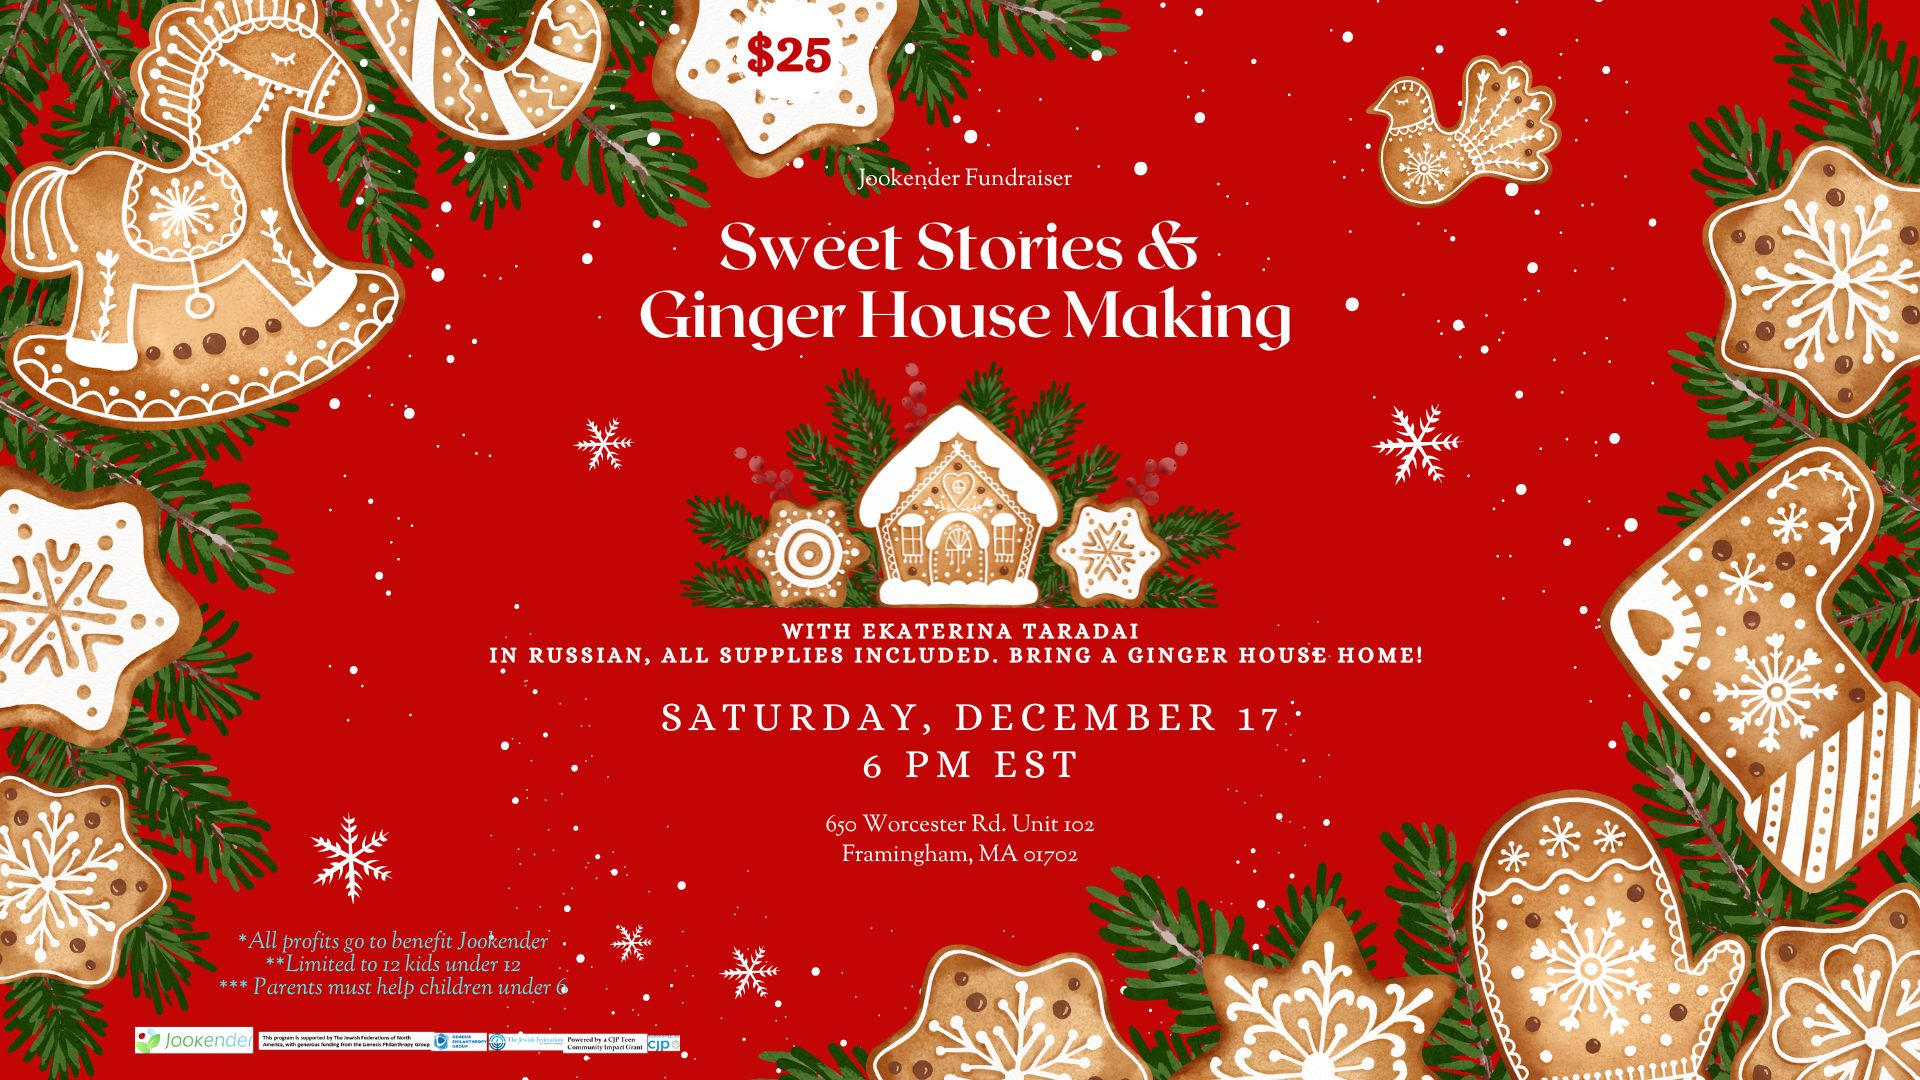 Sweet Stories & Ginger House Making